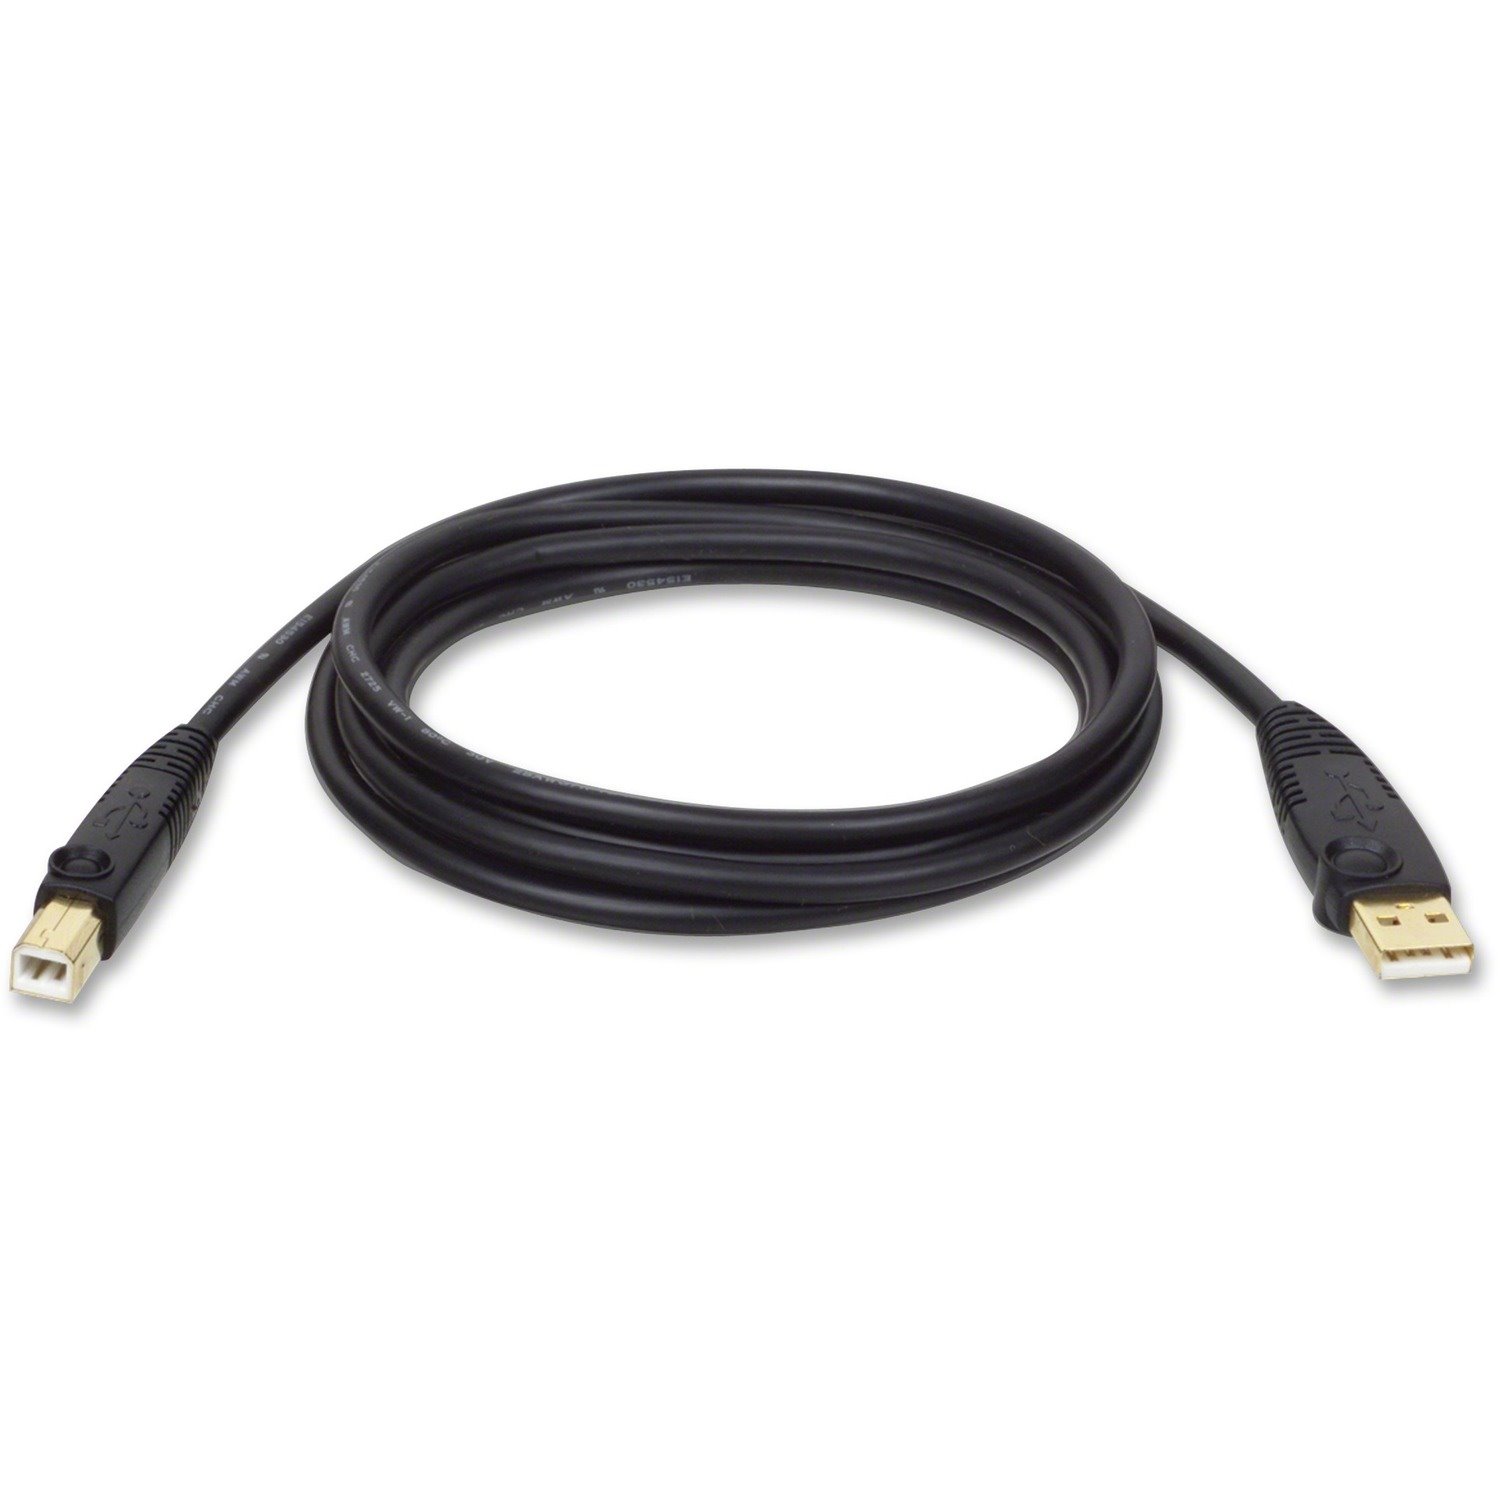 Tripp Lite 15ft USB 2.0 Hi-Speed A/B Device Cable Shielded Male / Male